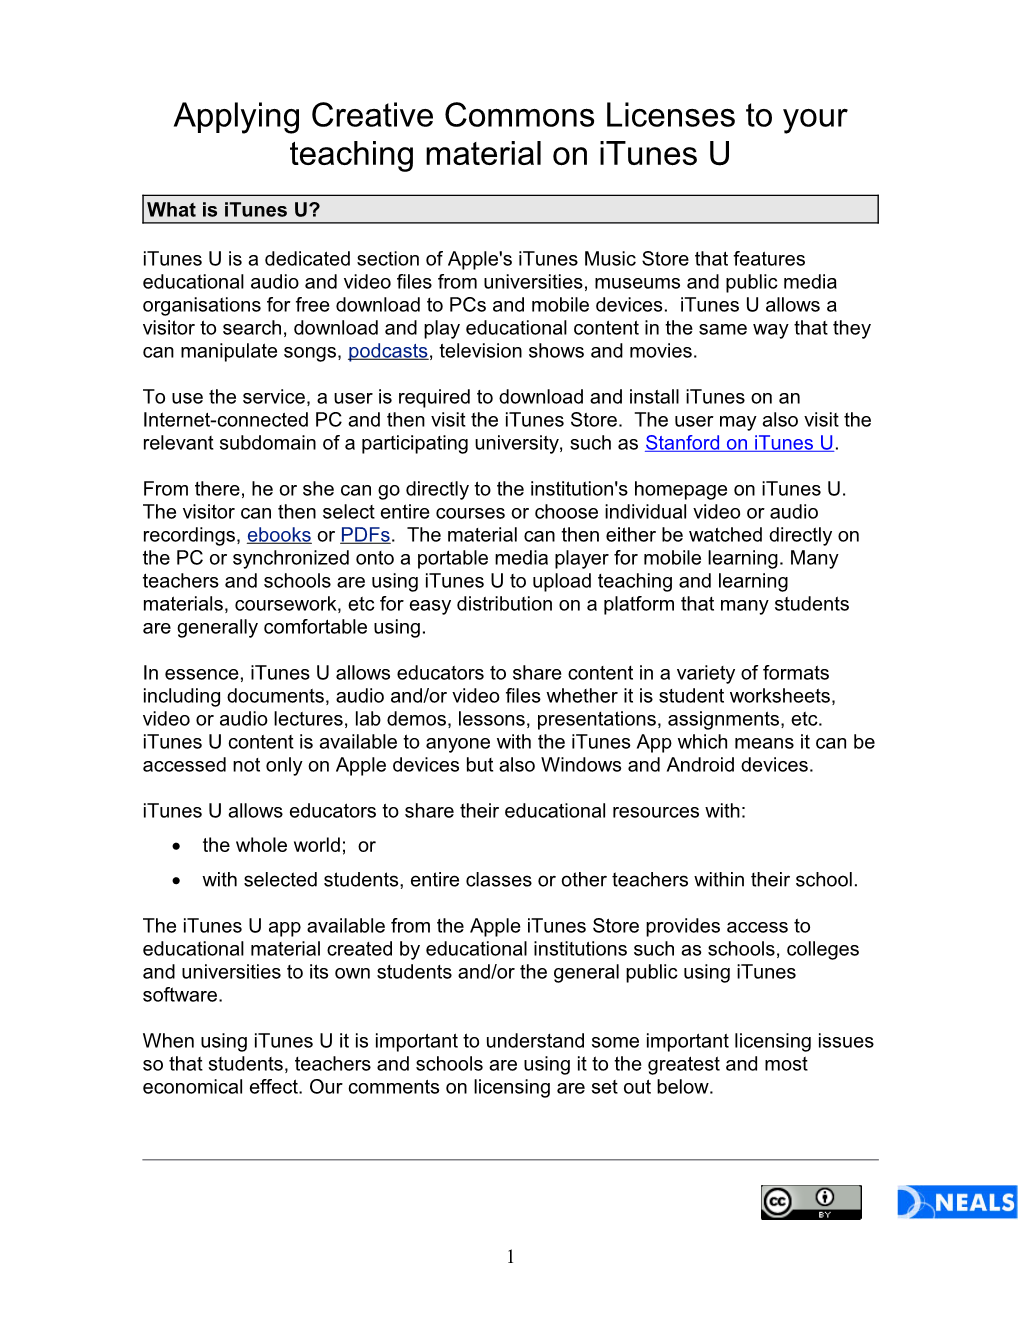 Applying Creative Commons Licenses to Your Teaching Material on Itunes U